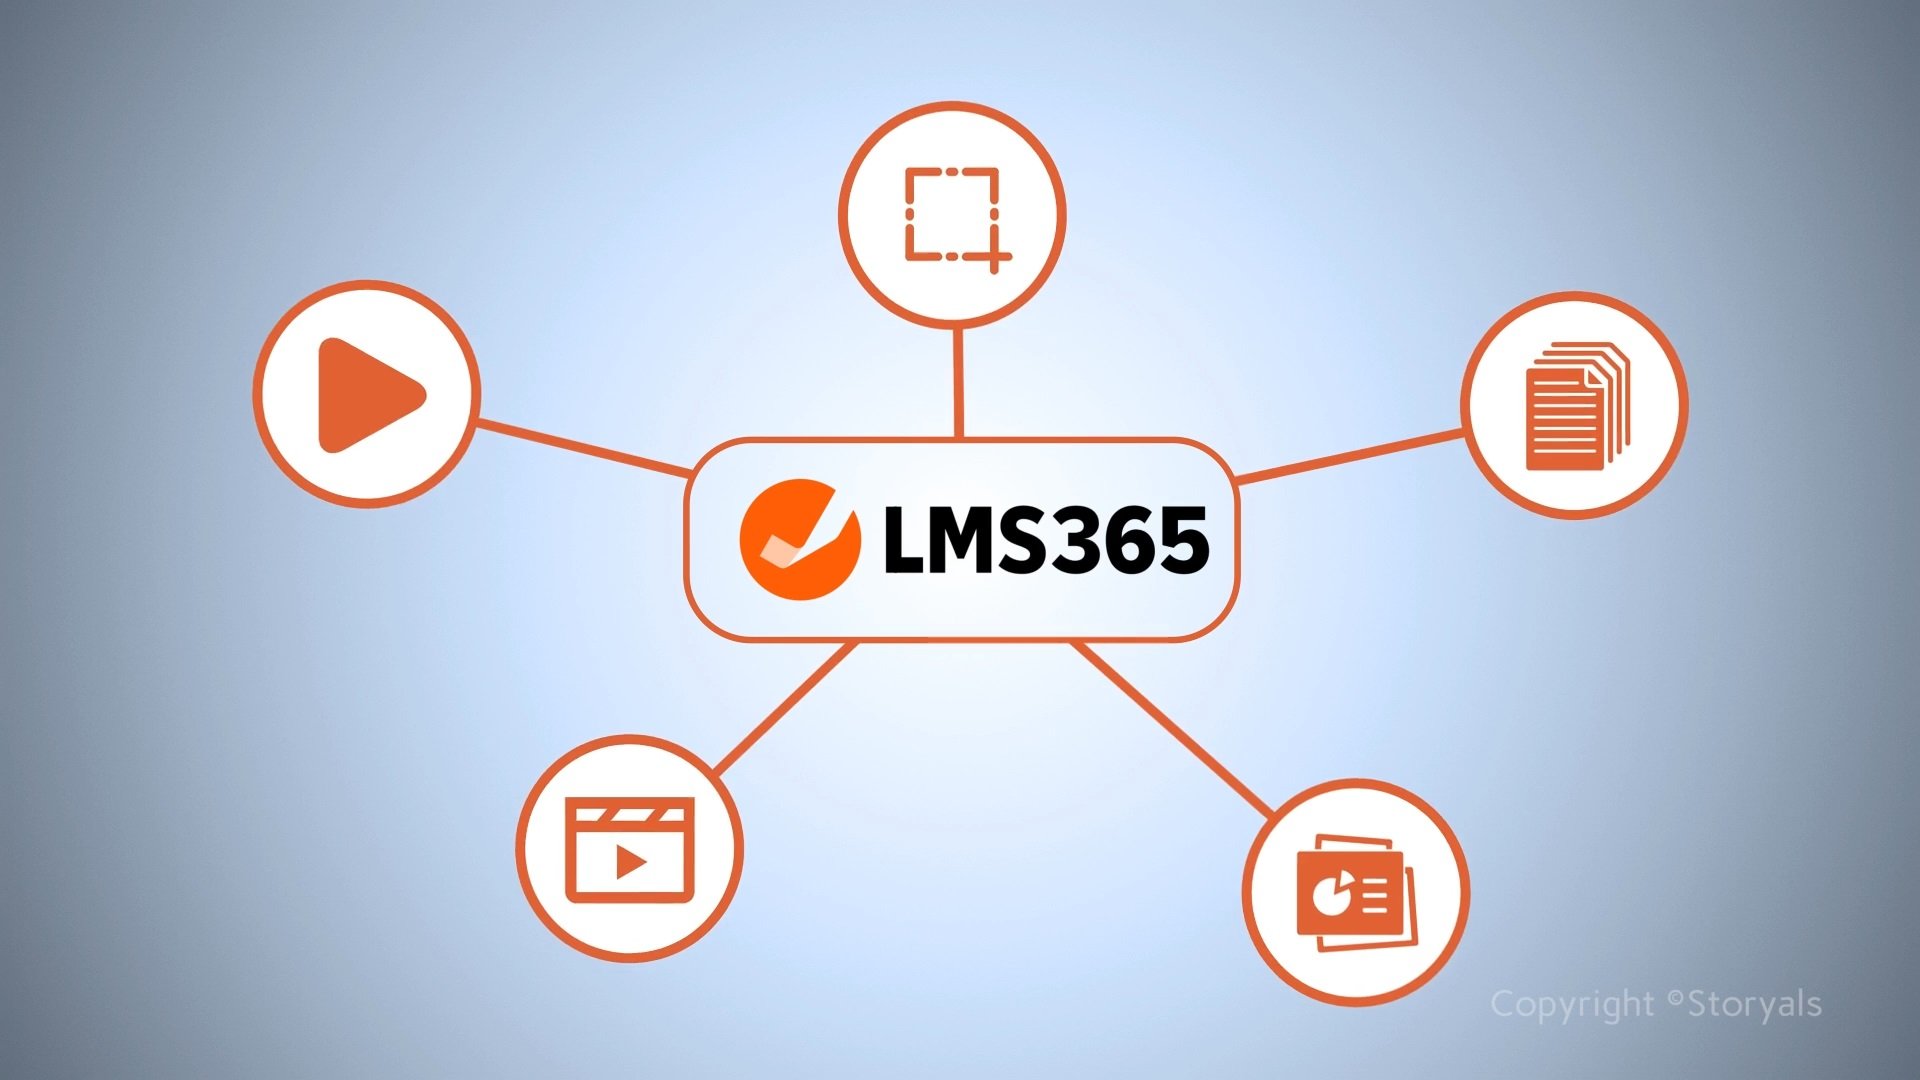 LMS365 features